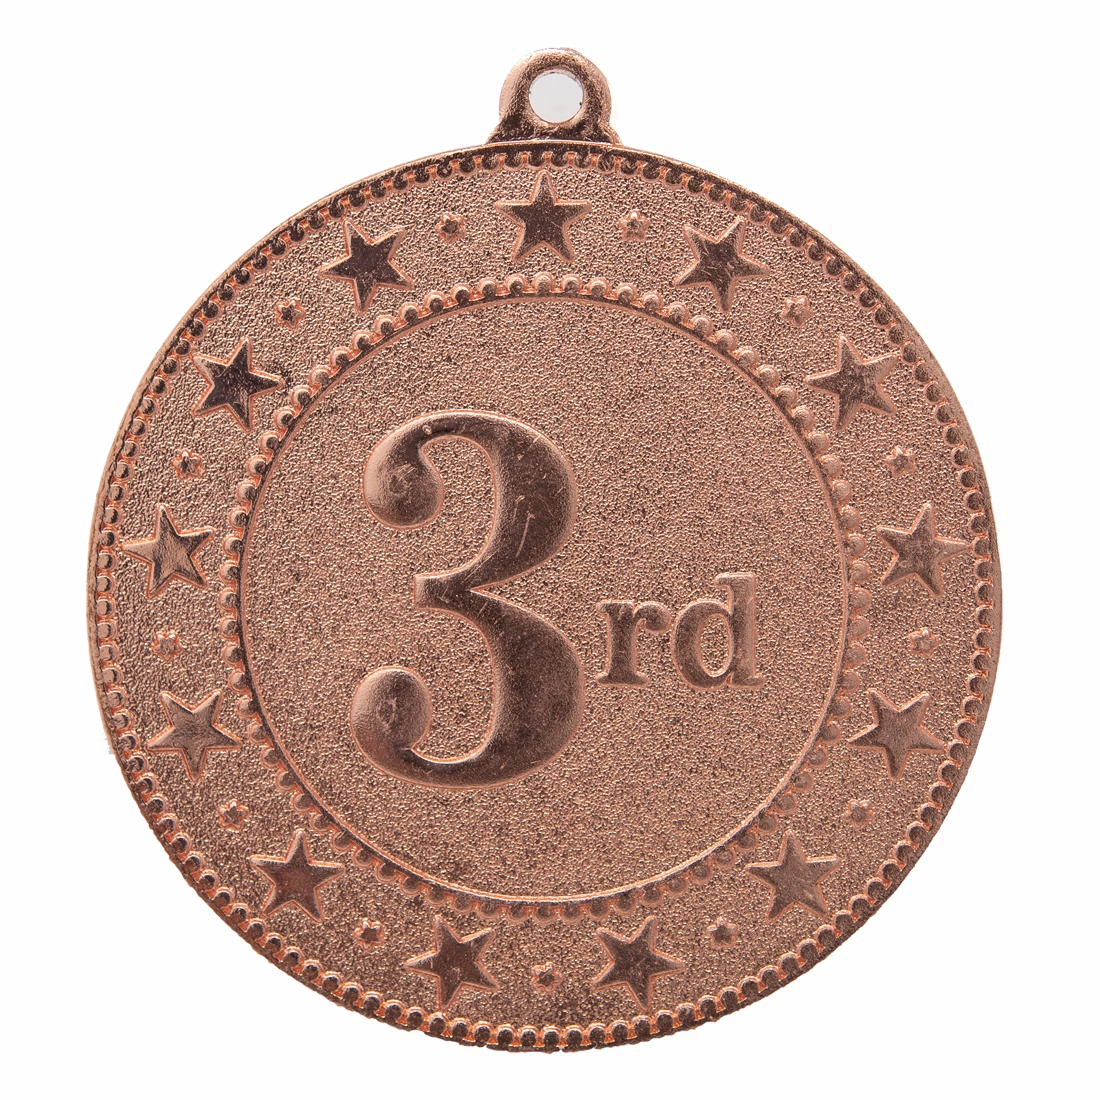 2" Express Series 3rd Place Medal DSS03